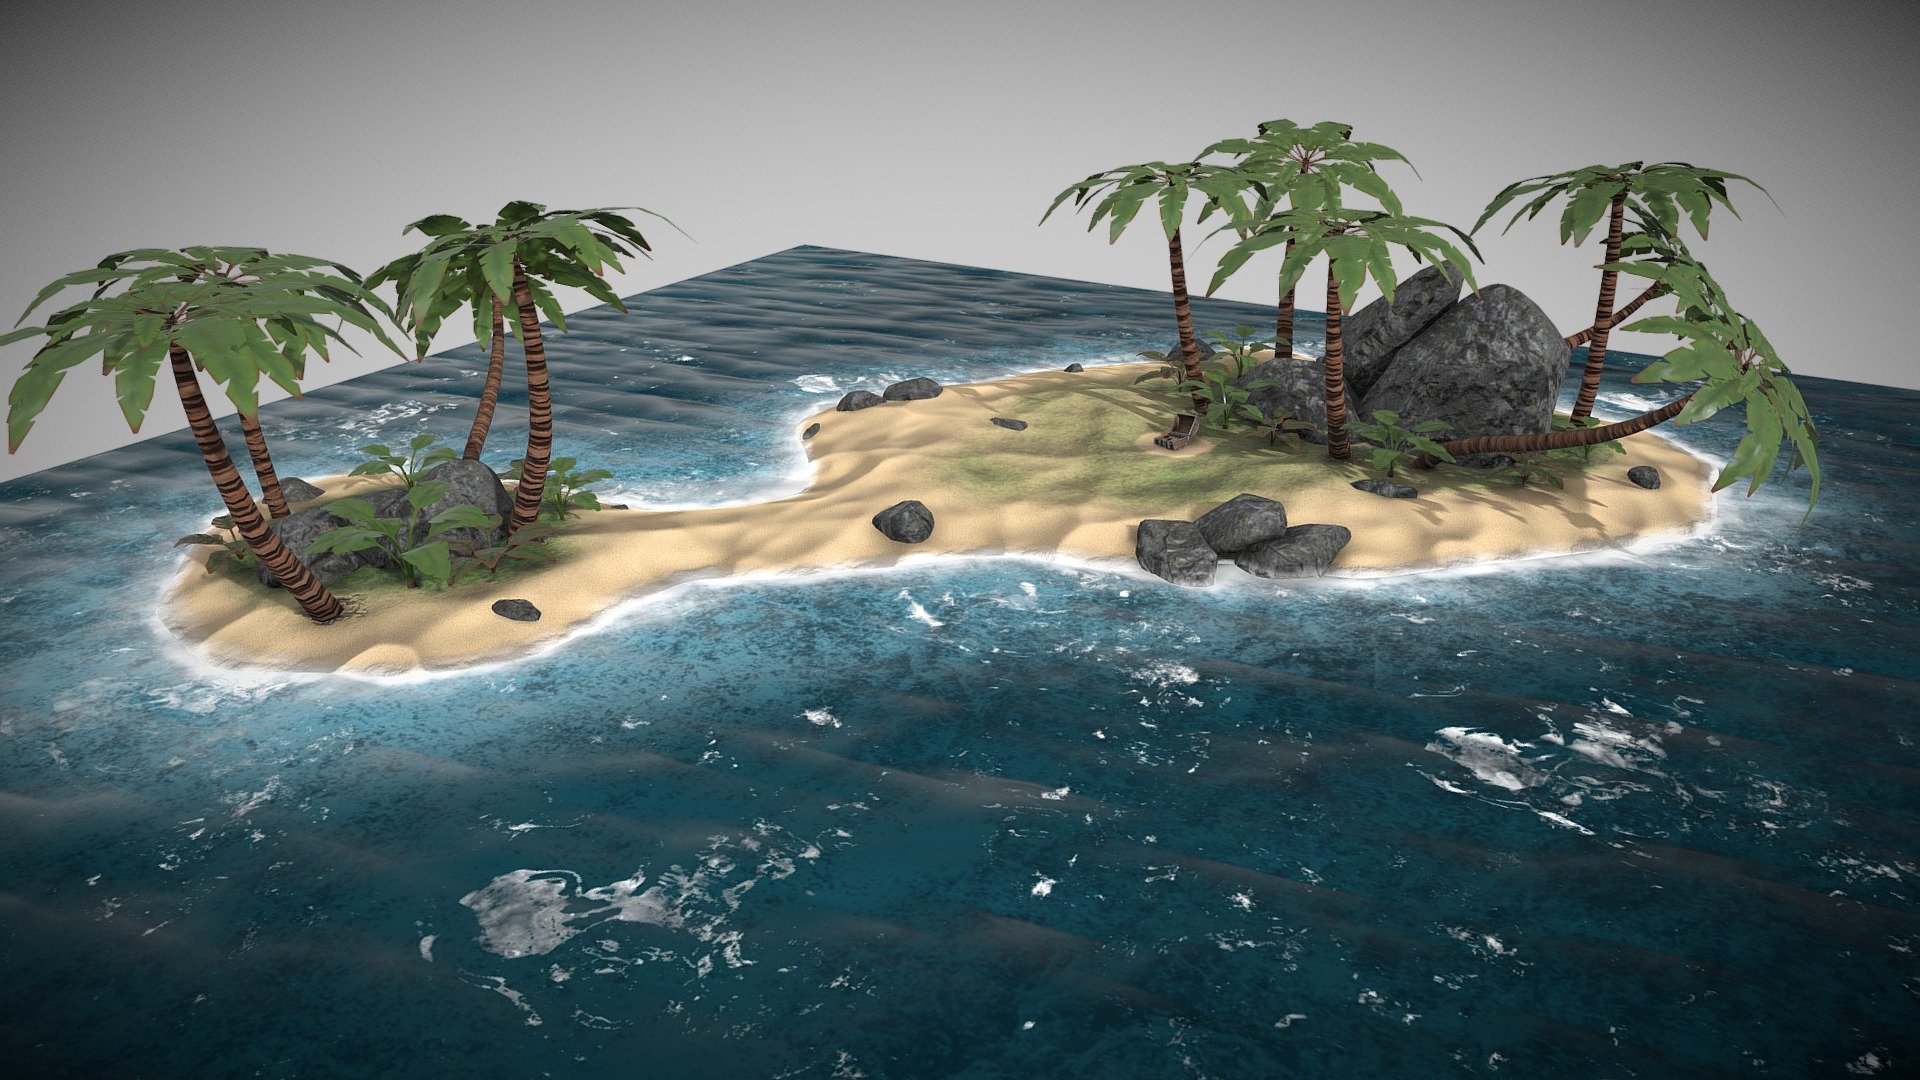 My own design for a Treasure Island in realistic style.
Everything is game-ready and optimized for mobile devices.
Model created in Blender 3D, Textured in Substance Painter.
Triangles: 19,958 - Treasure Chest Island - 3D model by Jan Klopotowski (@JanKlopotowski7) 3d model